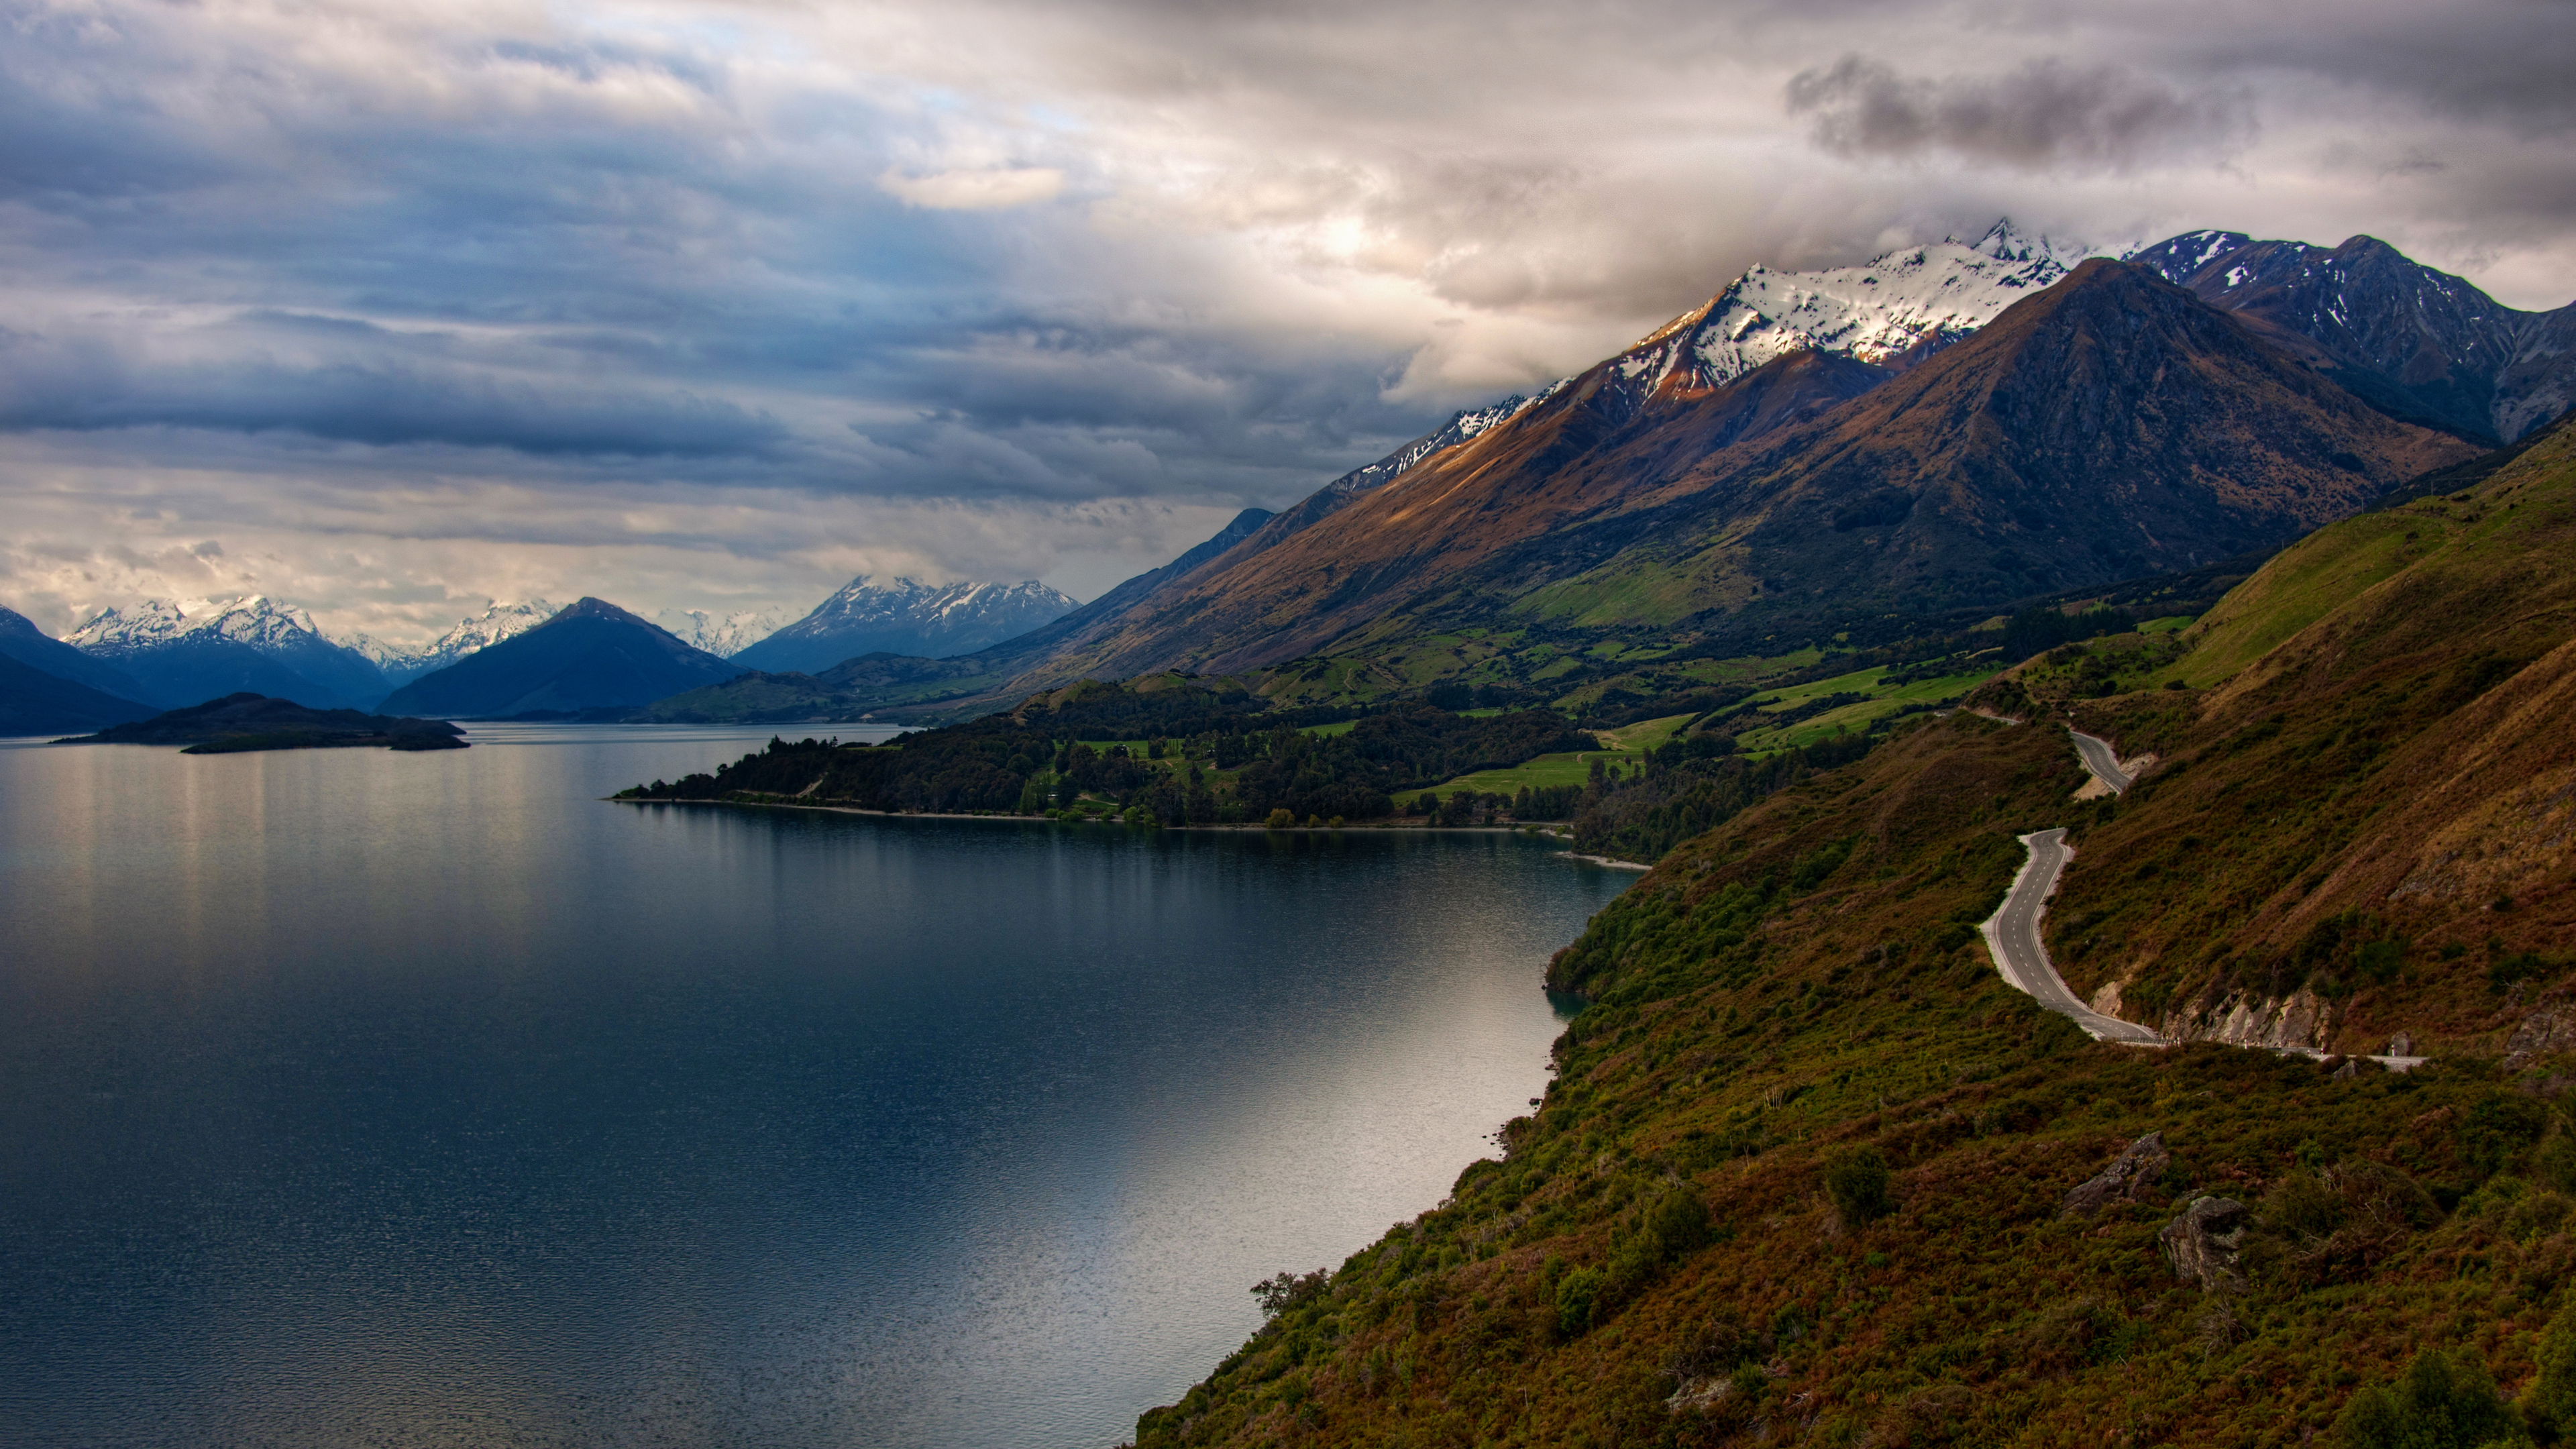 General 3840x2160 landscape 4K New Zealand nature mountains clouds sea water snow road